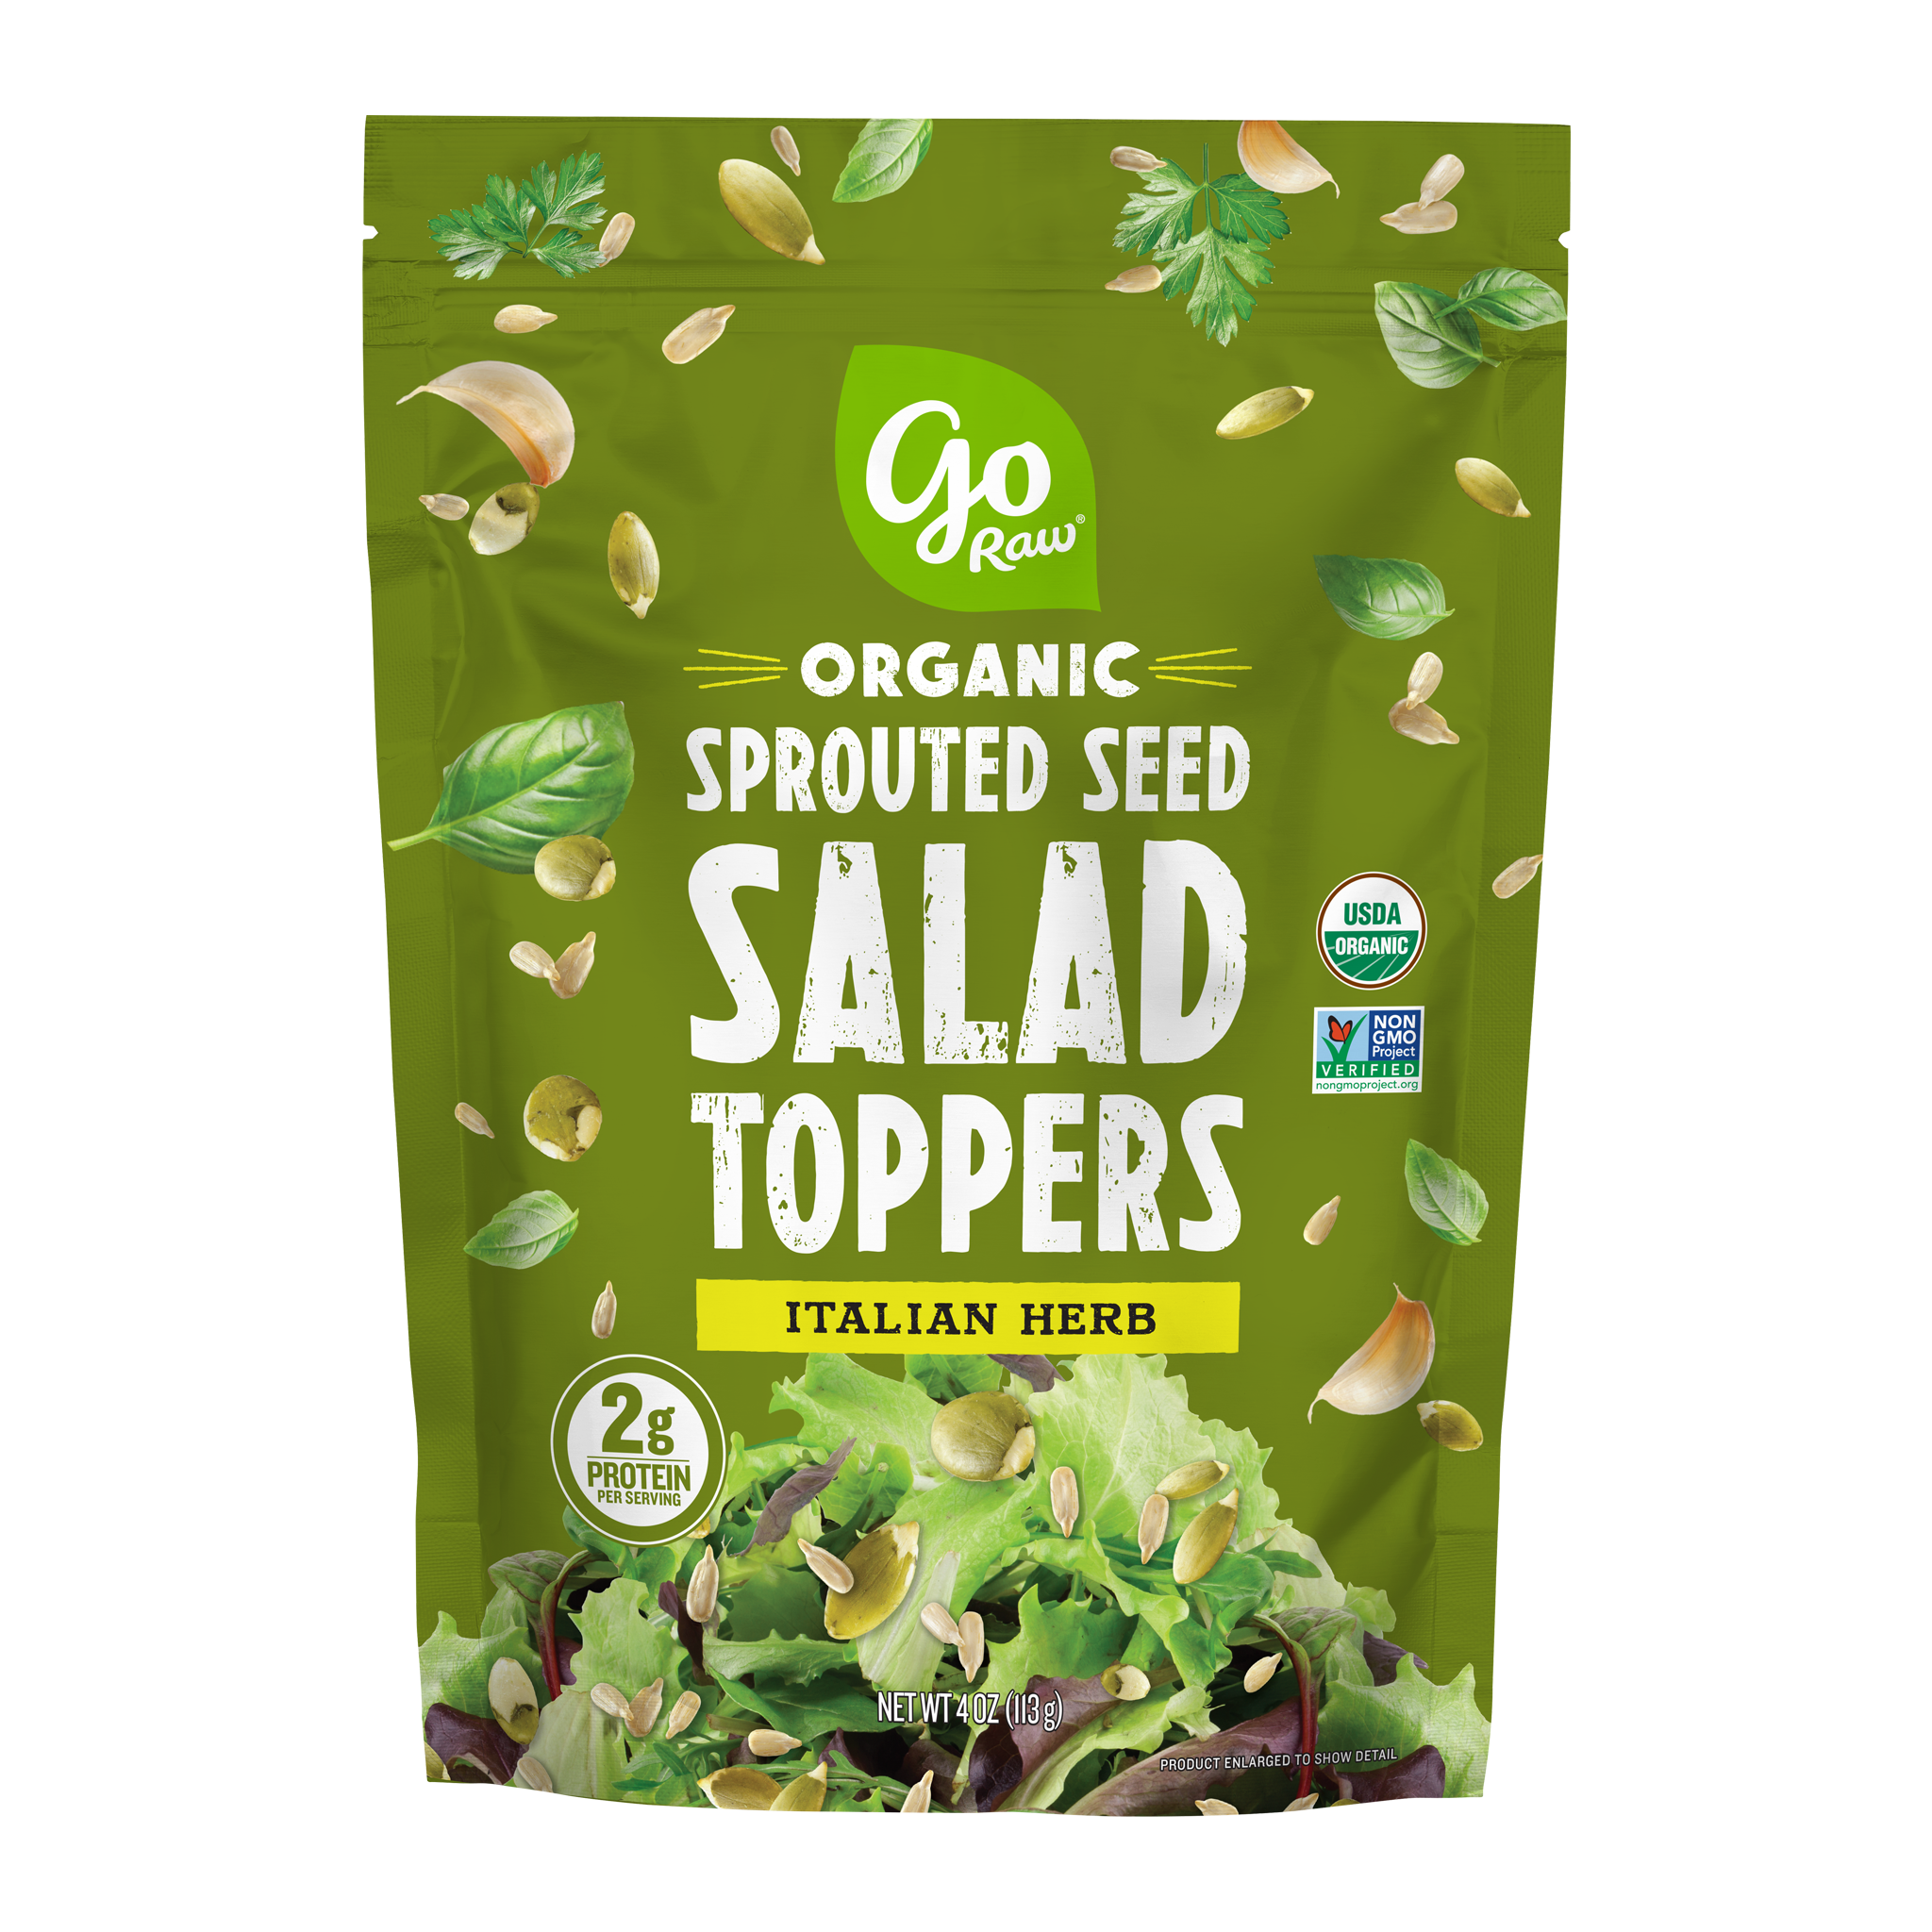 Italian Herb Sprouted Salad Toppers - 10 bags, 4oz each